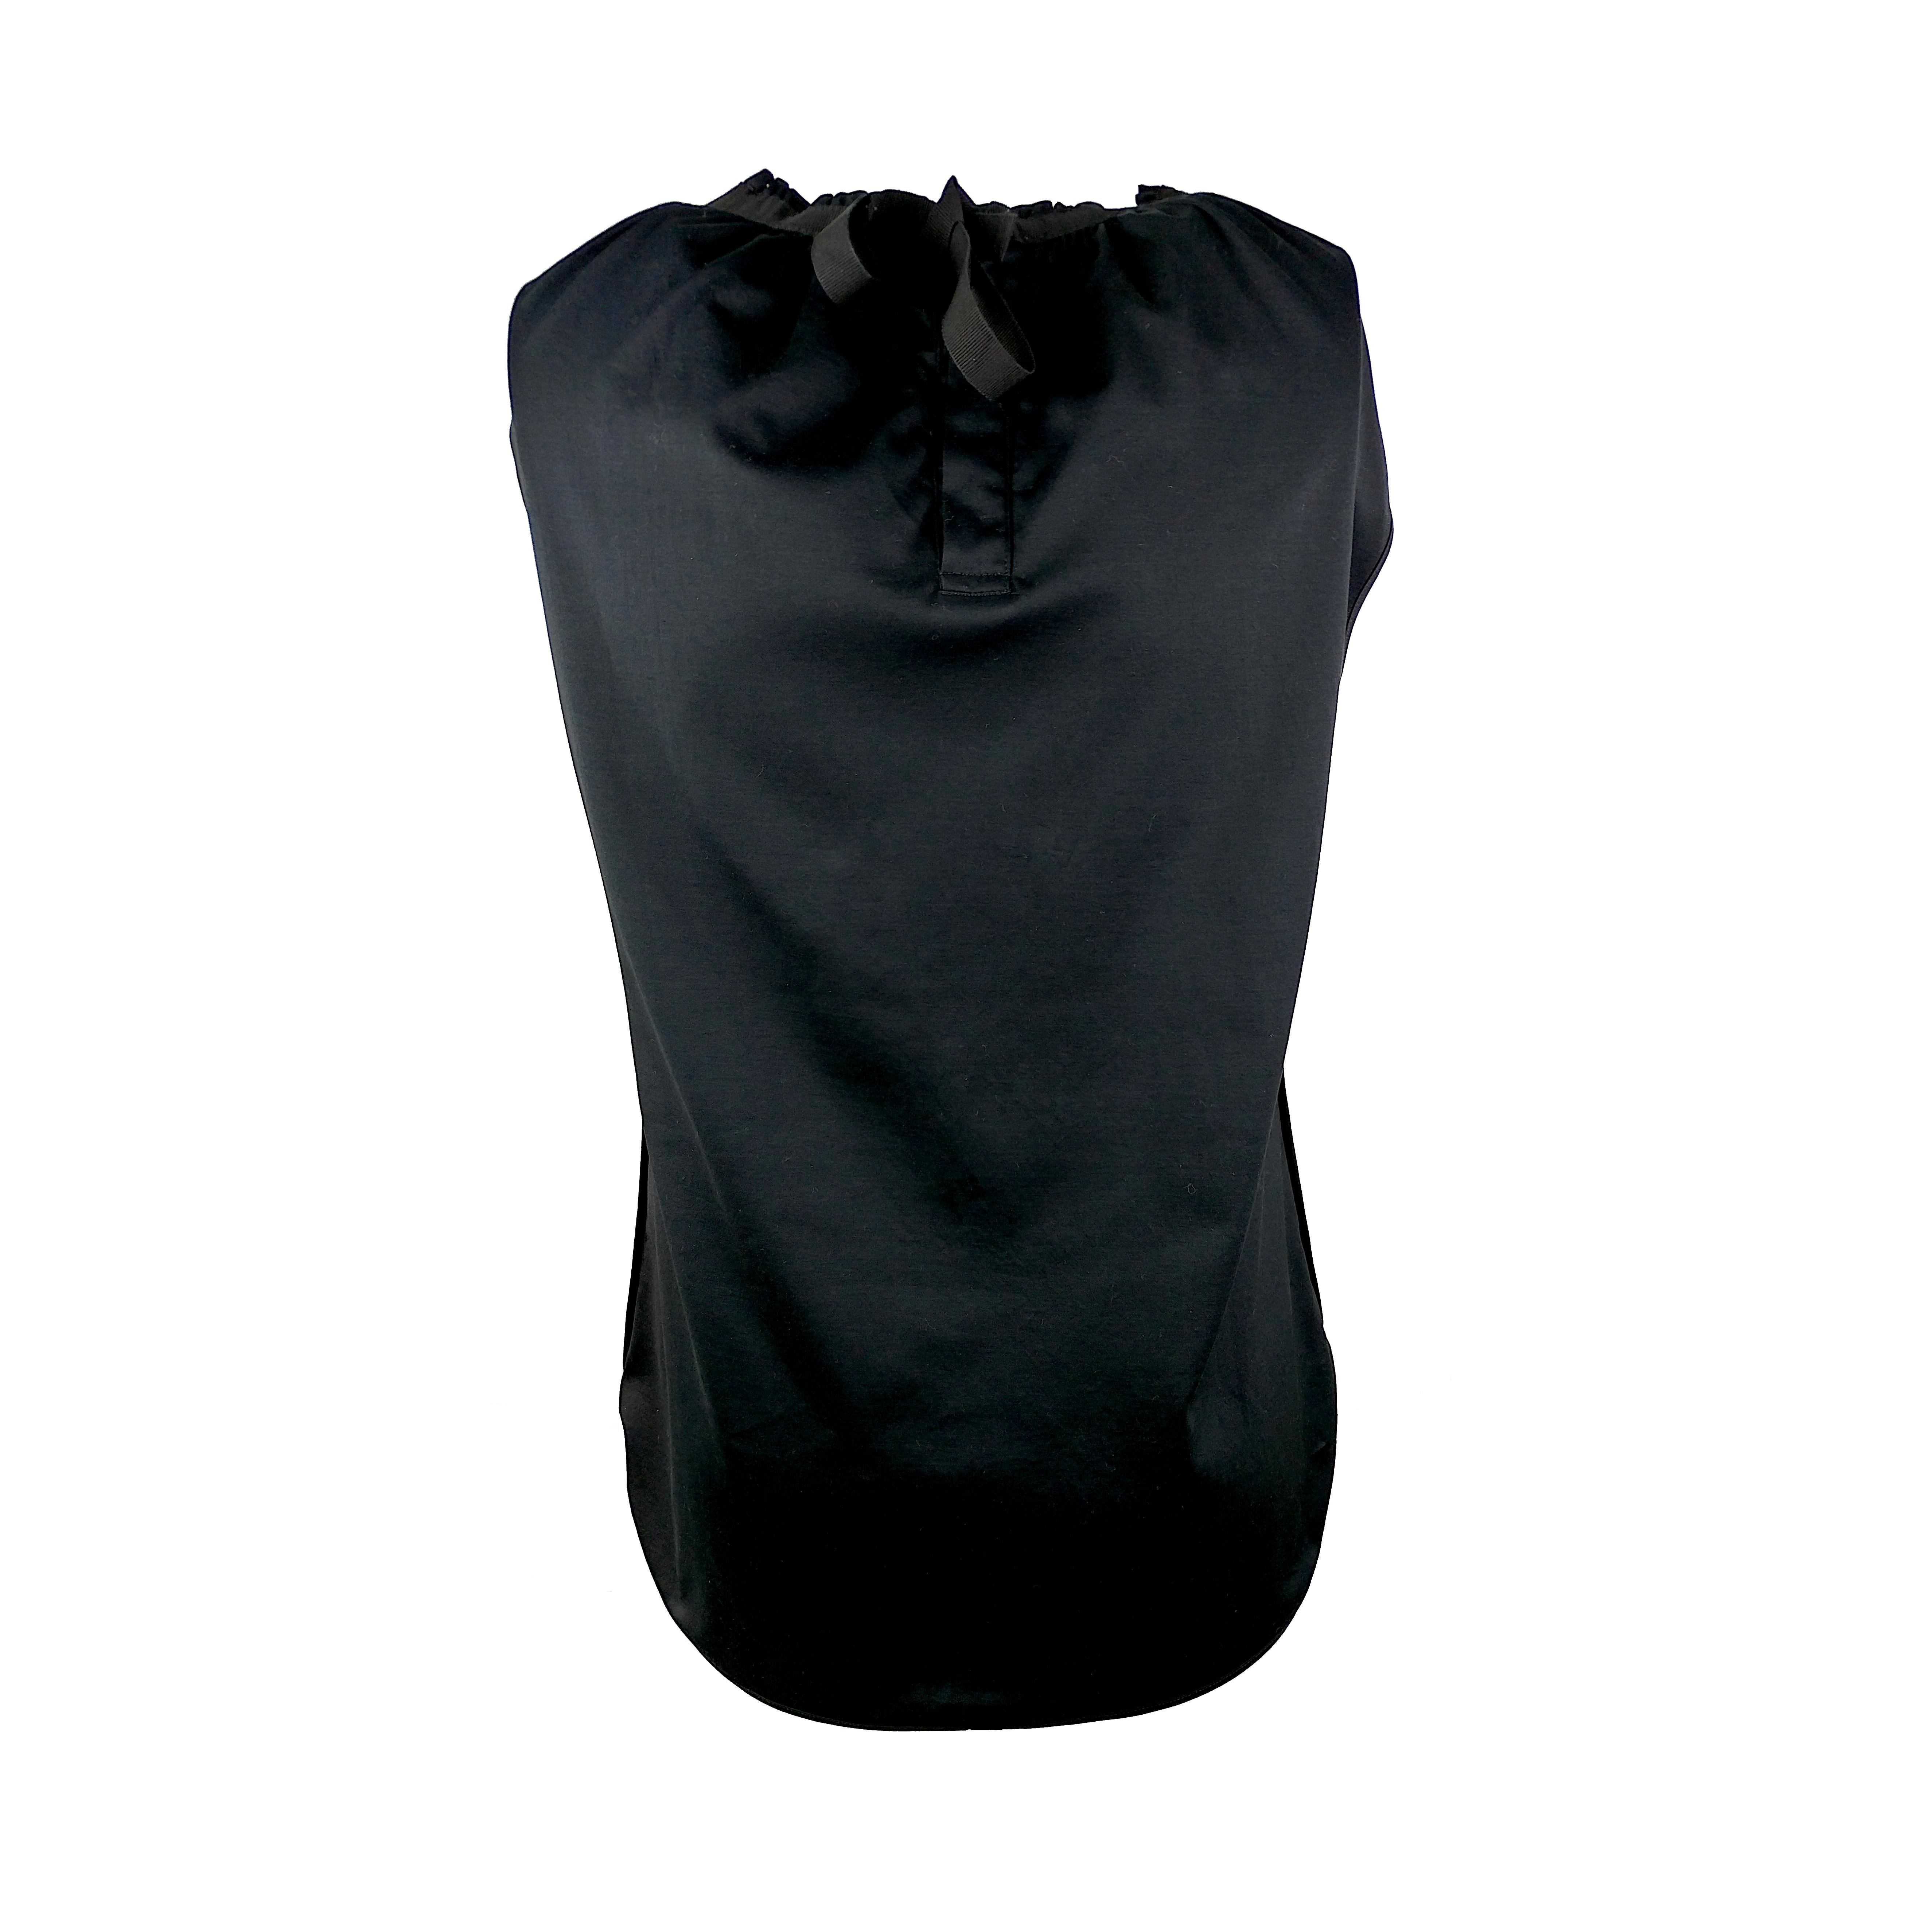 DOLCE & GABBANA – Genuine Black Cotton Sleeveless Top with Beads | Size S In Excellent Condition For Sale In Cuggiono, MI